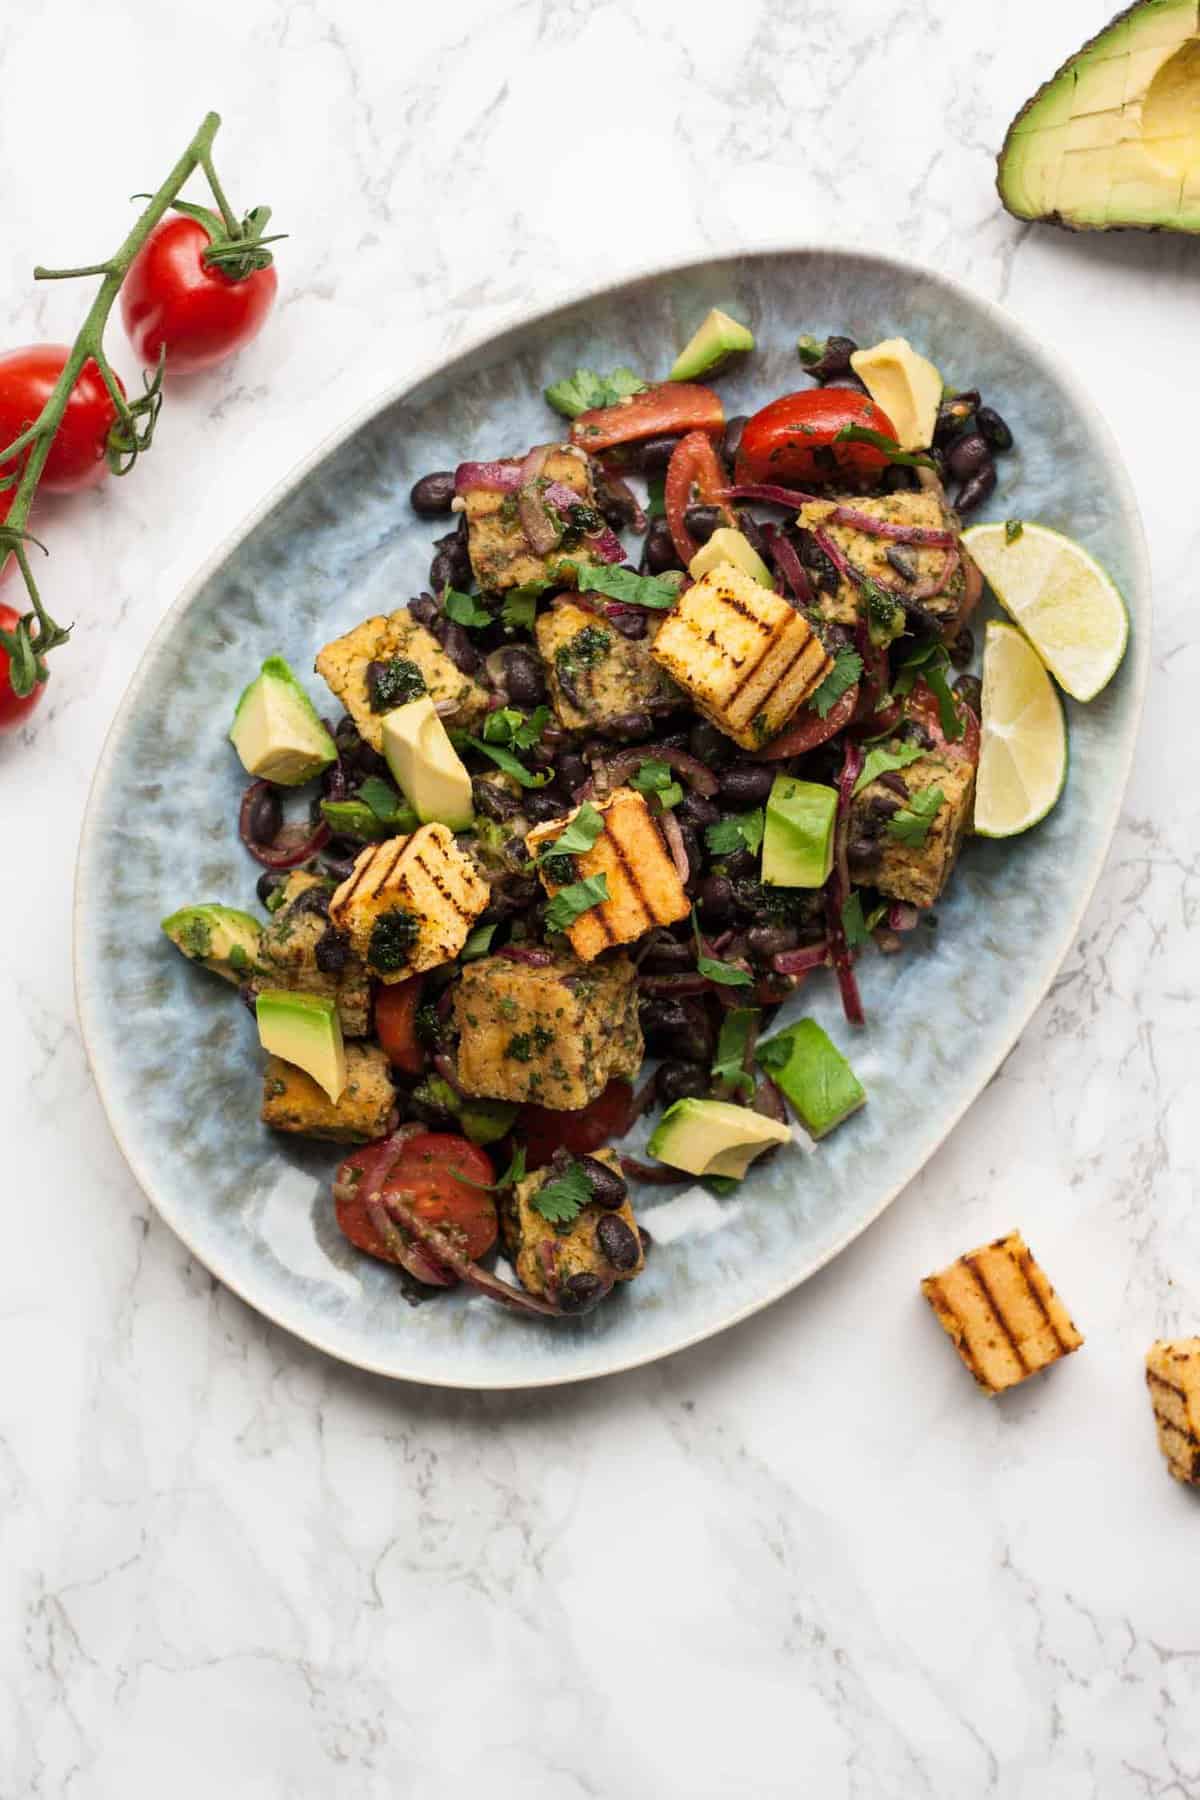 Mexican Panzanella Salad - this flavourful twist on the classic Italian bread salad is filled with black beans, avocado and cornbread and dressed with cilantro oil! | eatloveeats.com